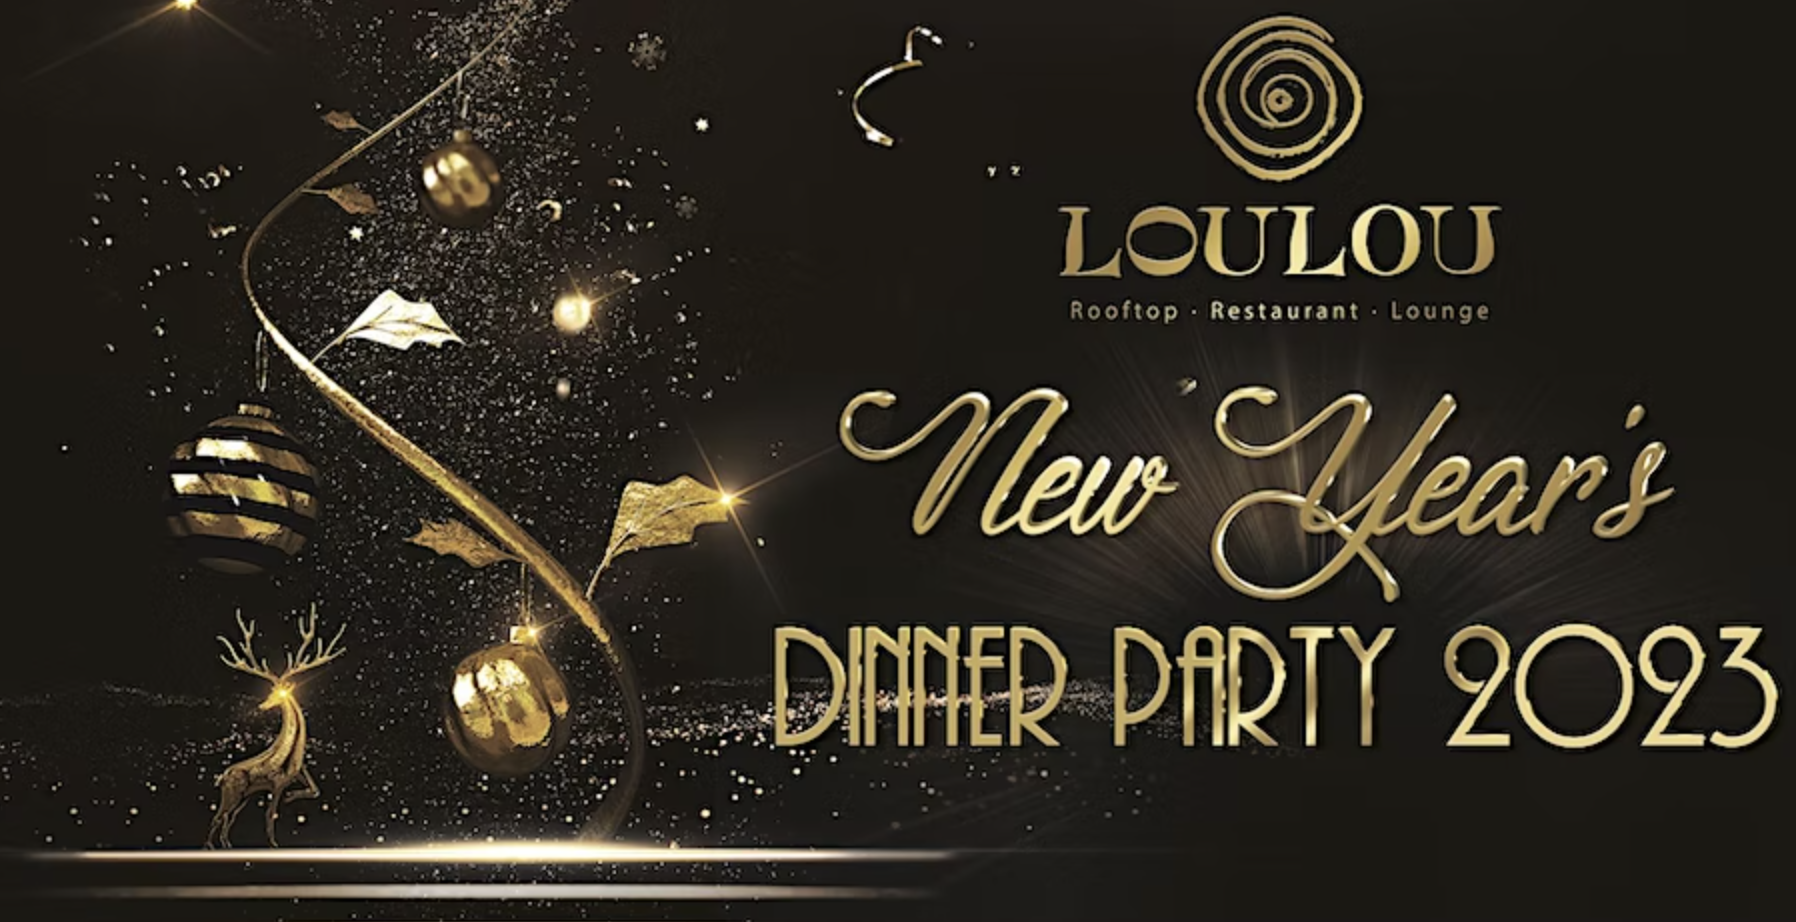 New Year's Eve Dinner Party at LouLou